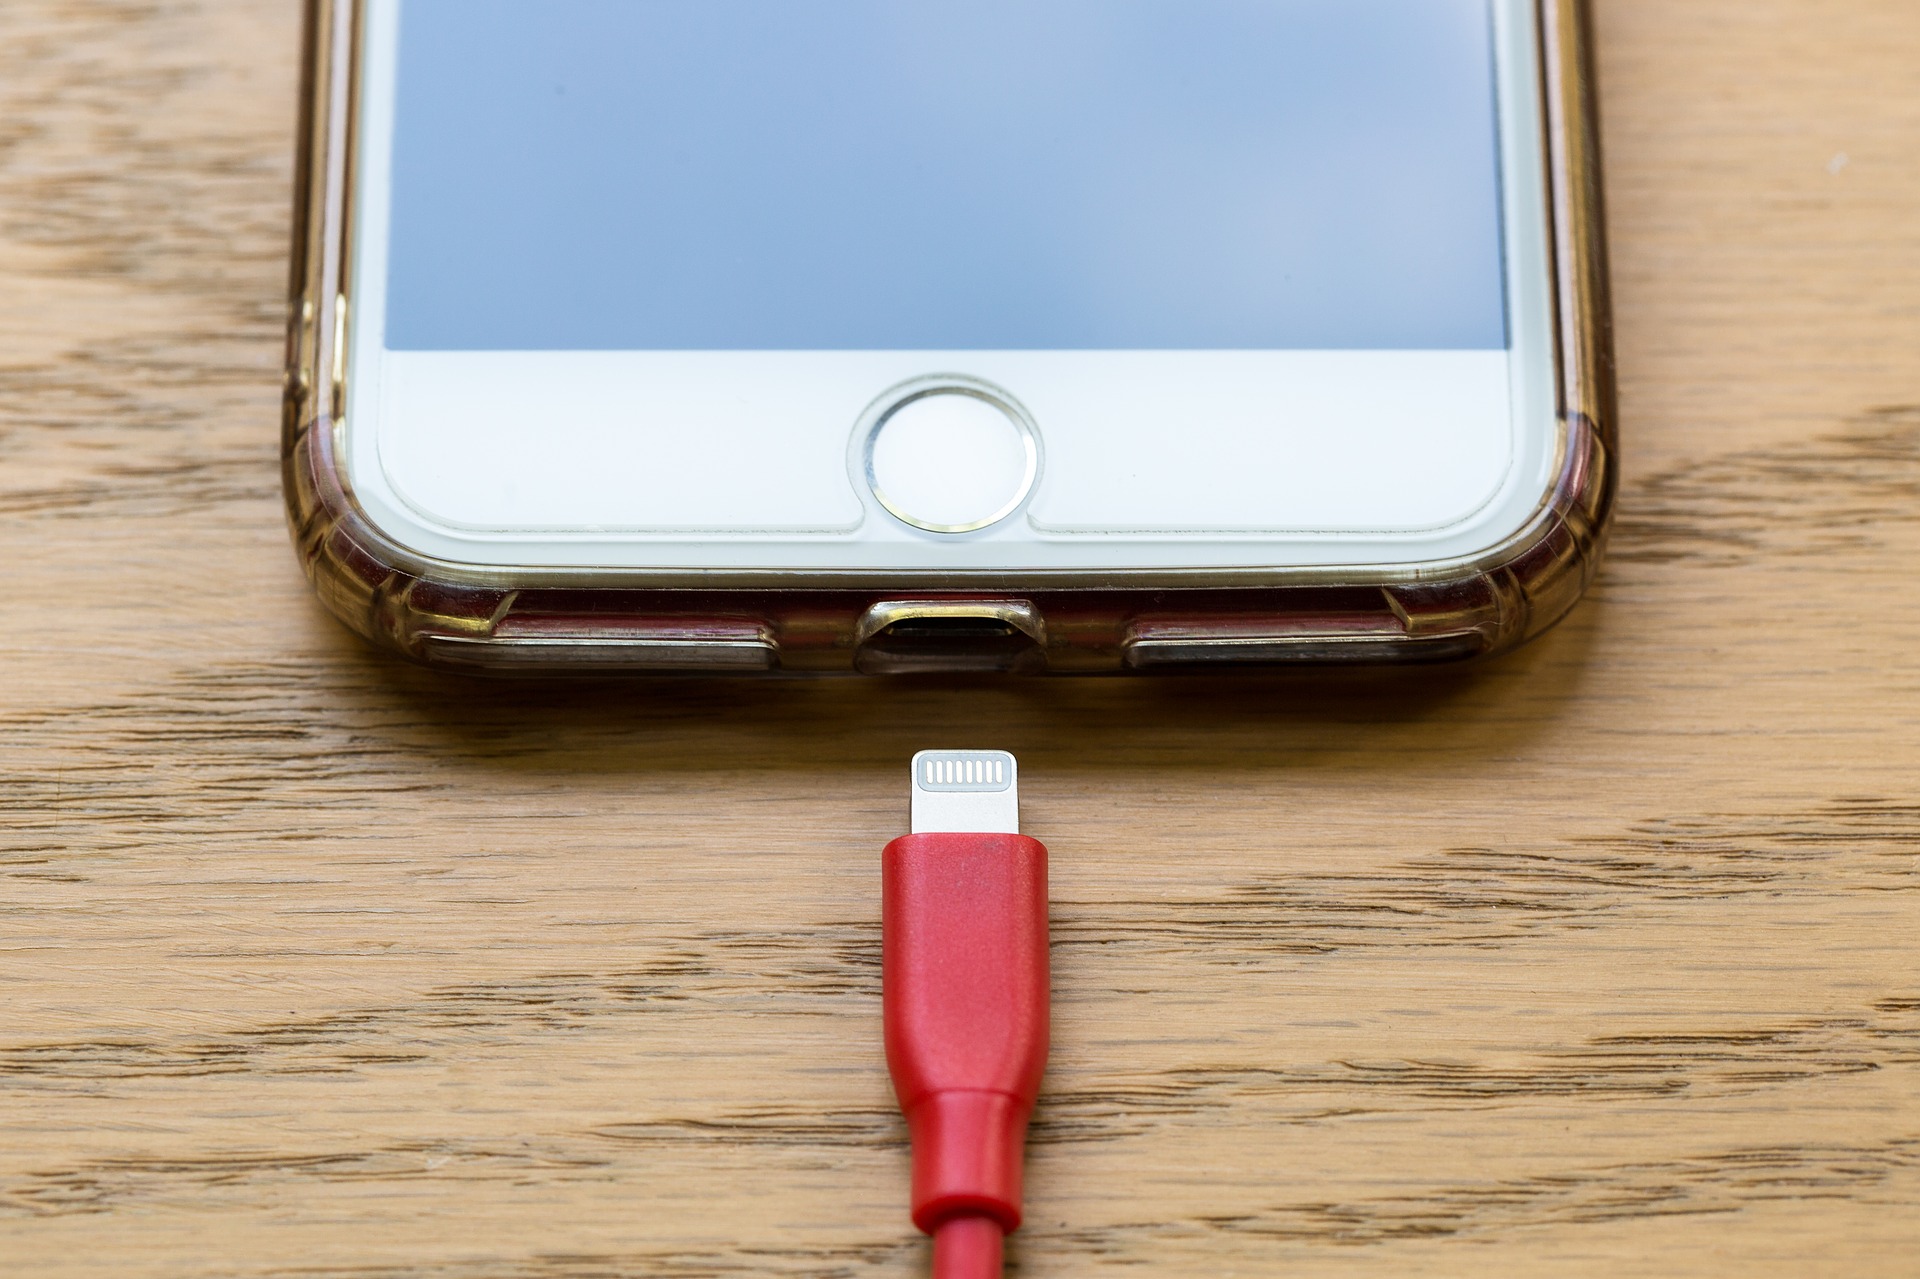 Why you shouldn't buy cheap iPhone cables: Avoid unofficial